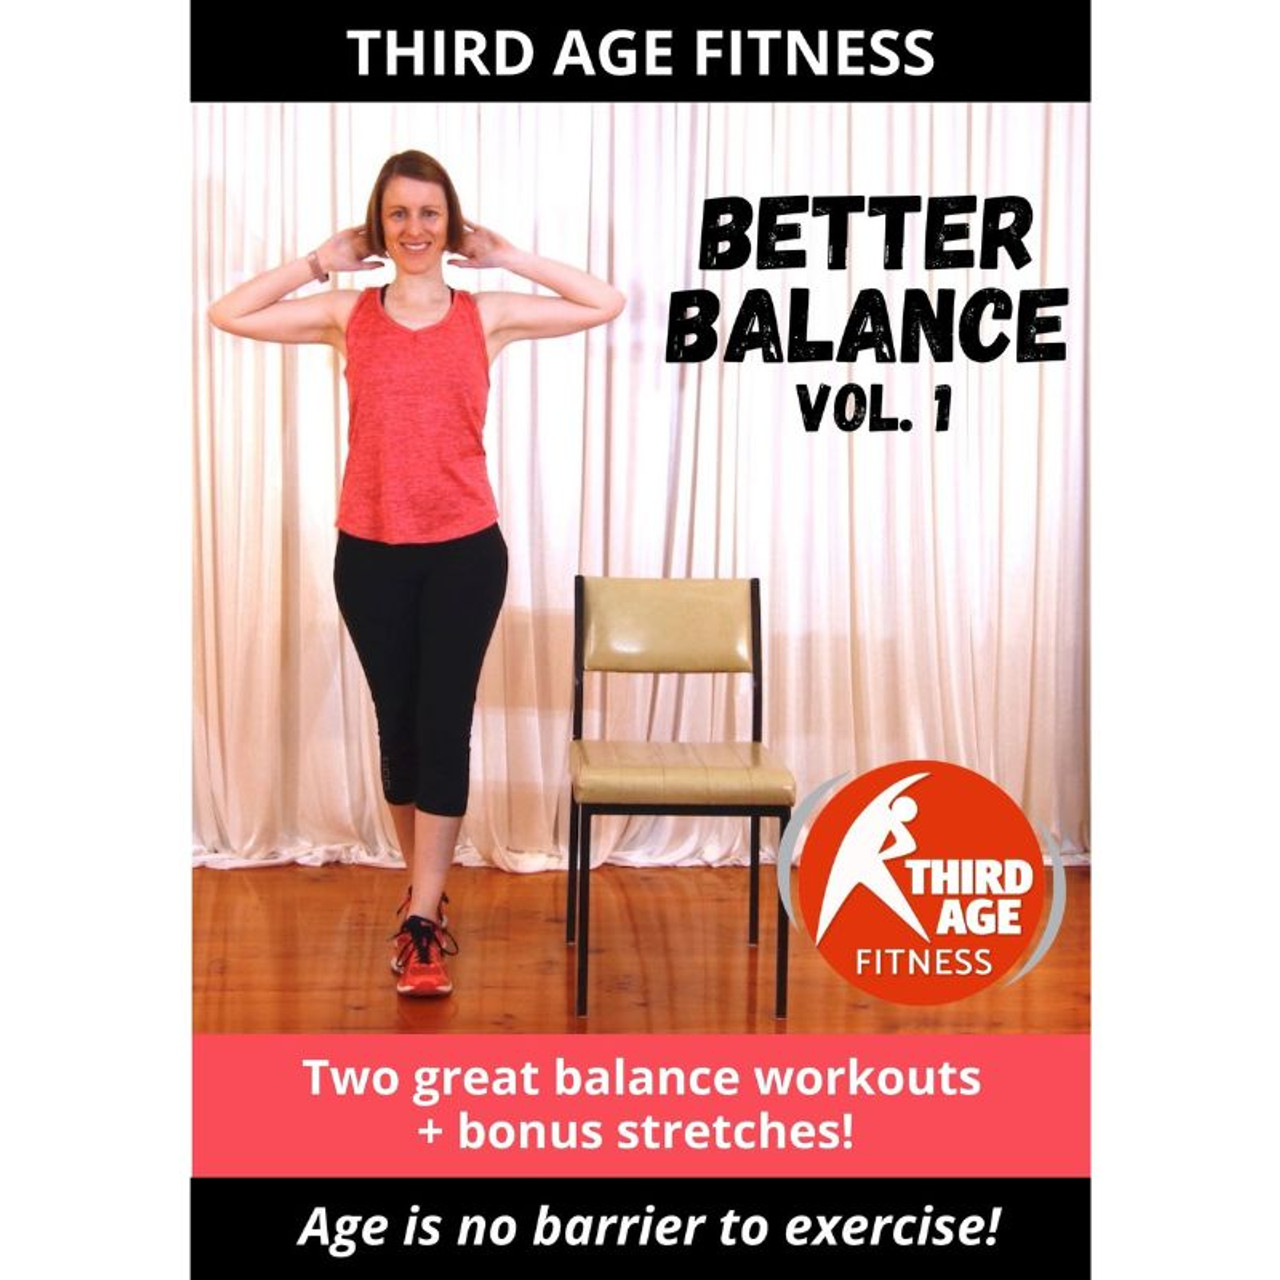 Better Balance Vol. 1 - Balance exercise DVD for older adults and